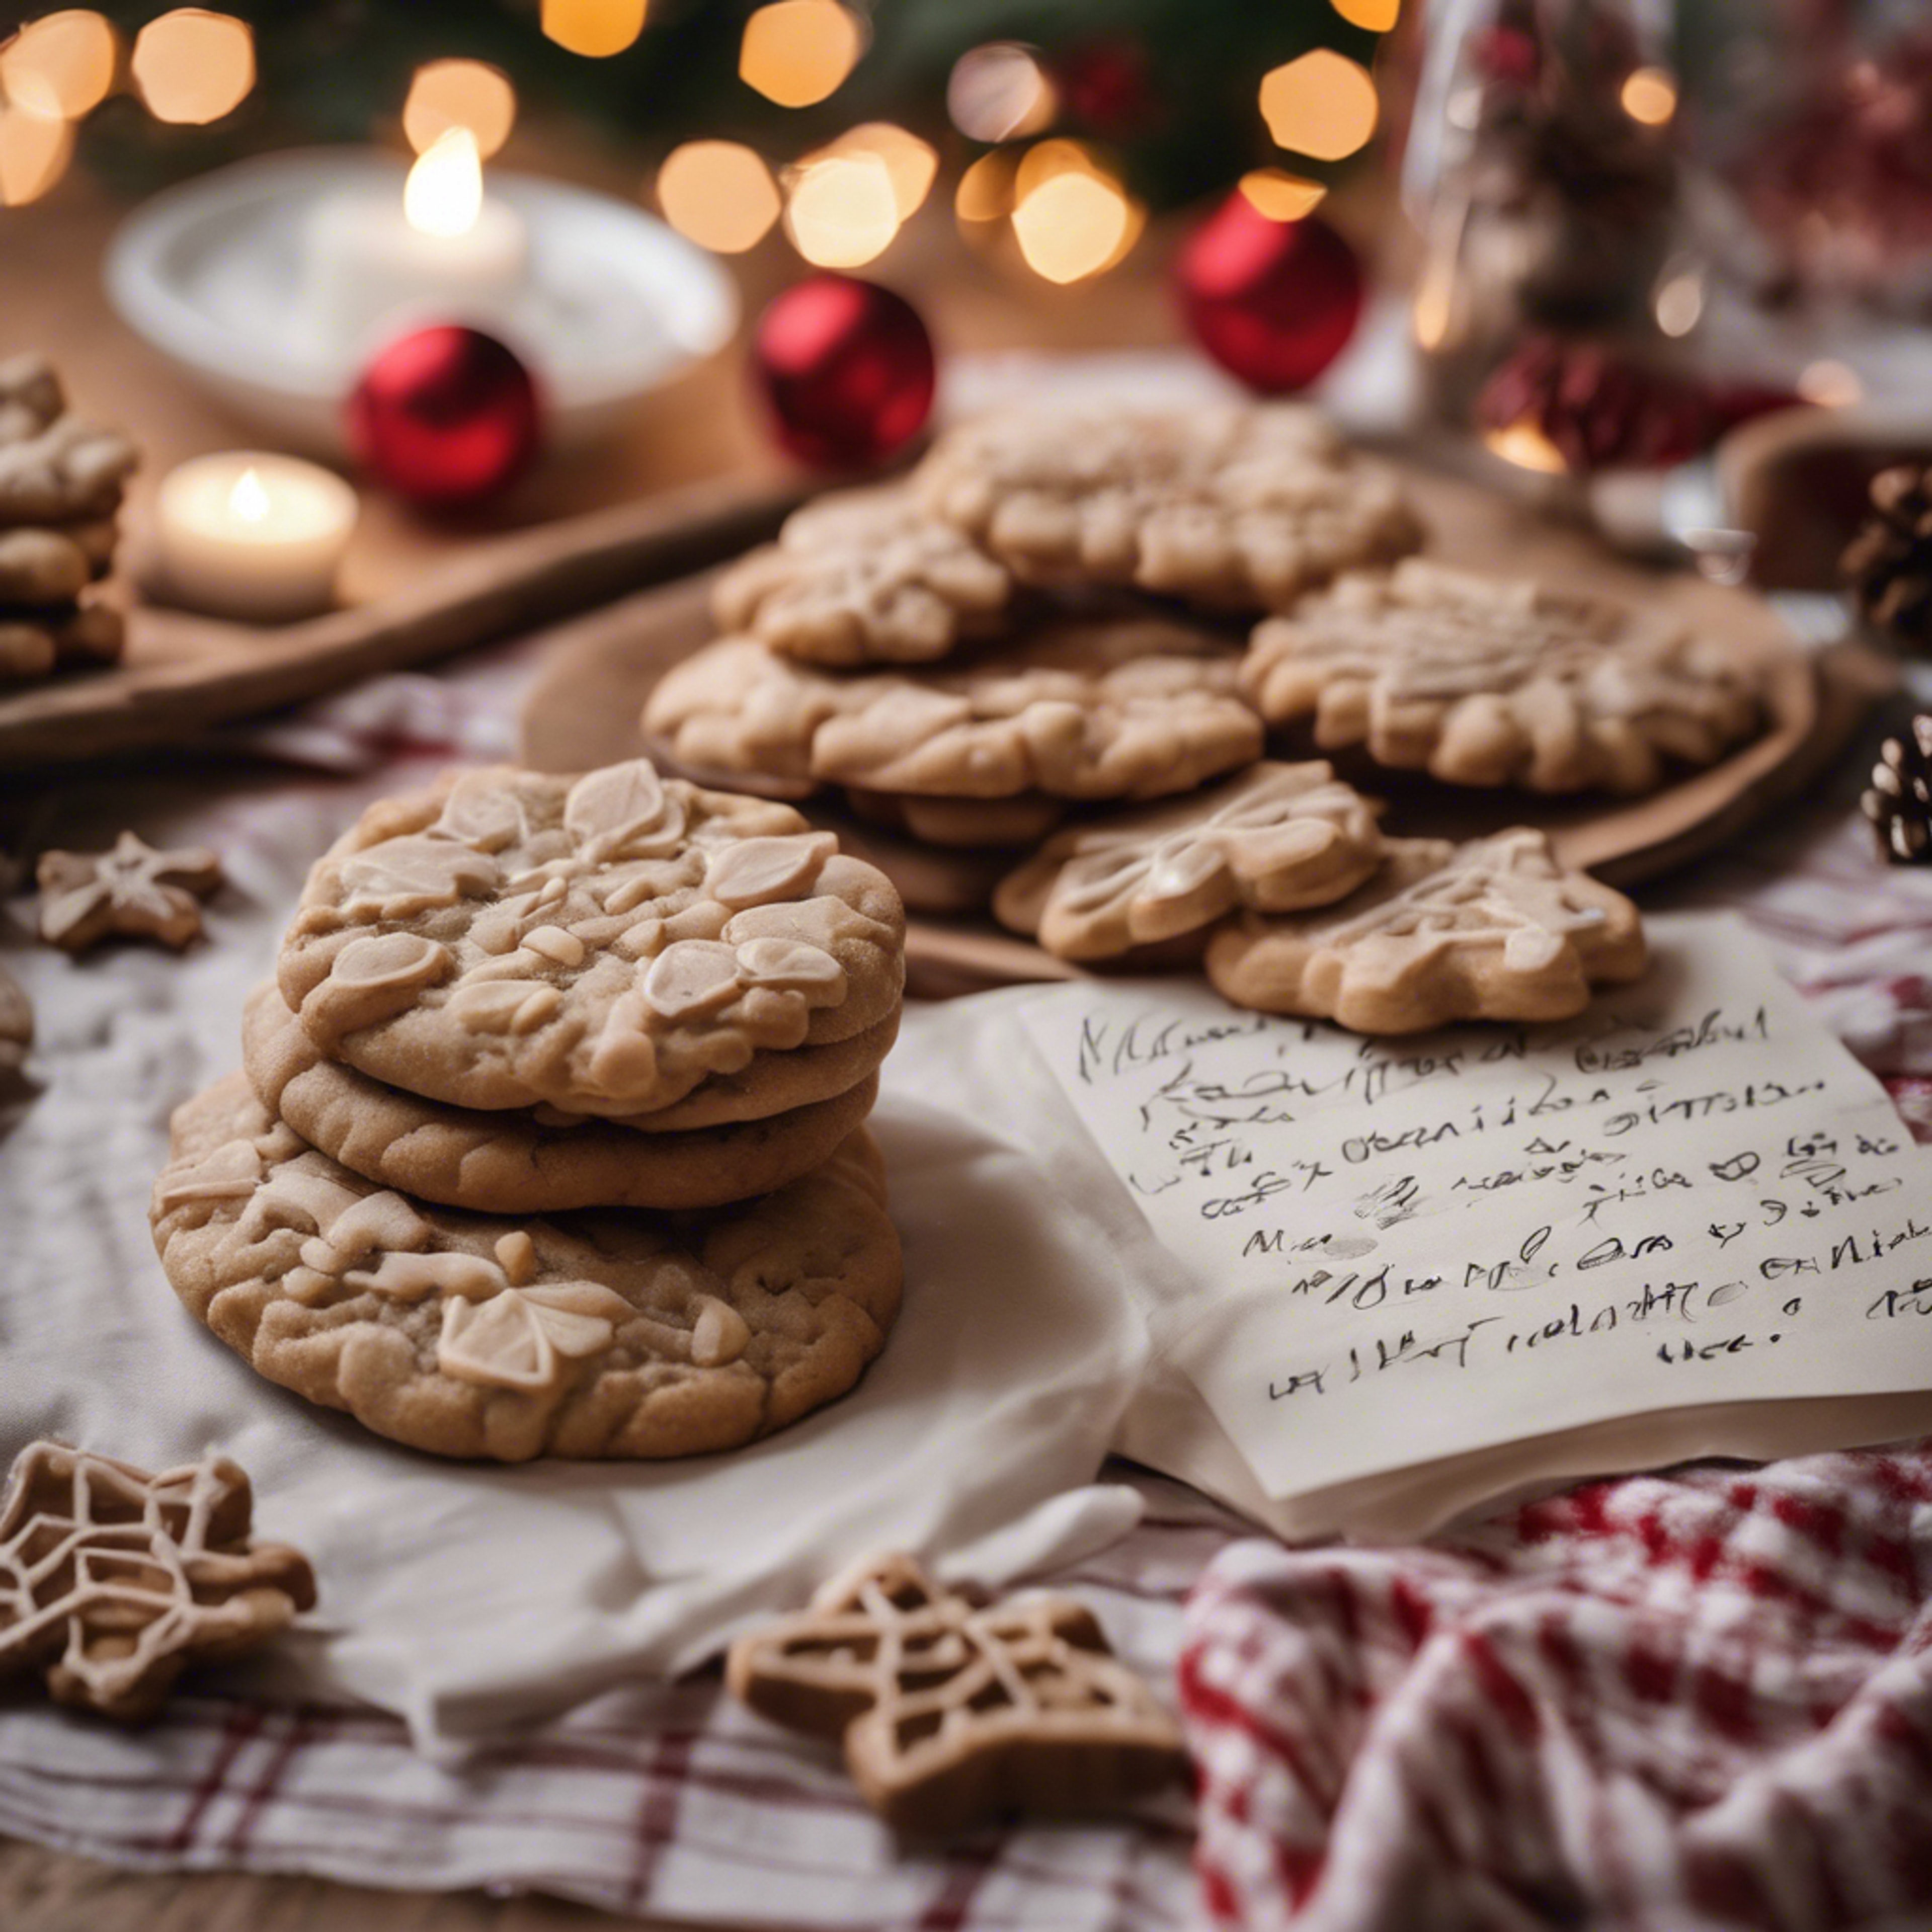 A spread of cozy, homemade Christmas cookies on a festive tablecloth, a glass of milk, and a note to Santa. Tapetai[2a748ec29b0a47b6b2f7]